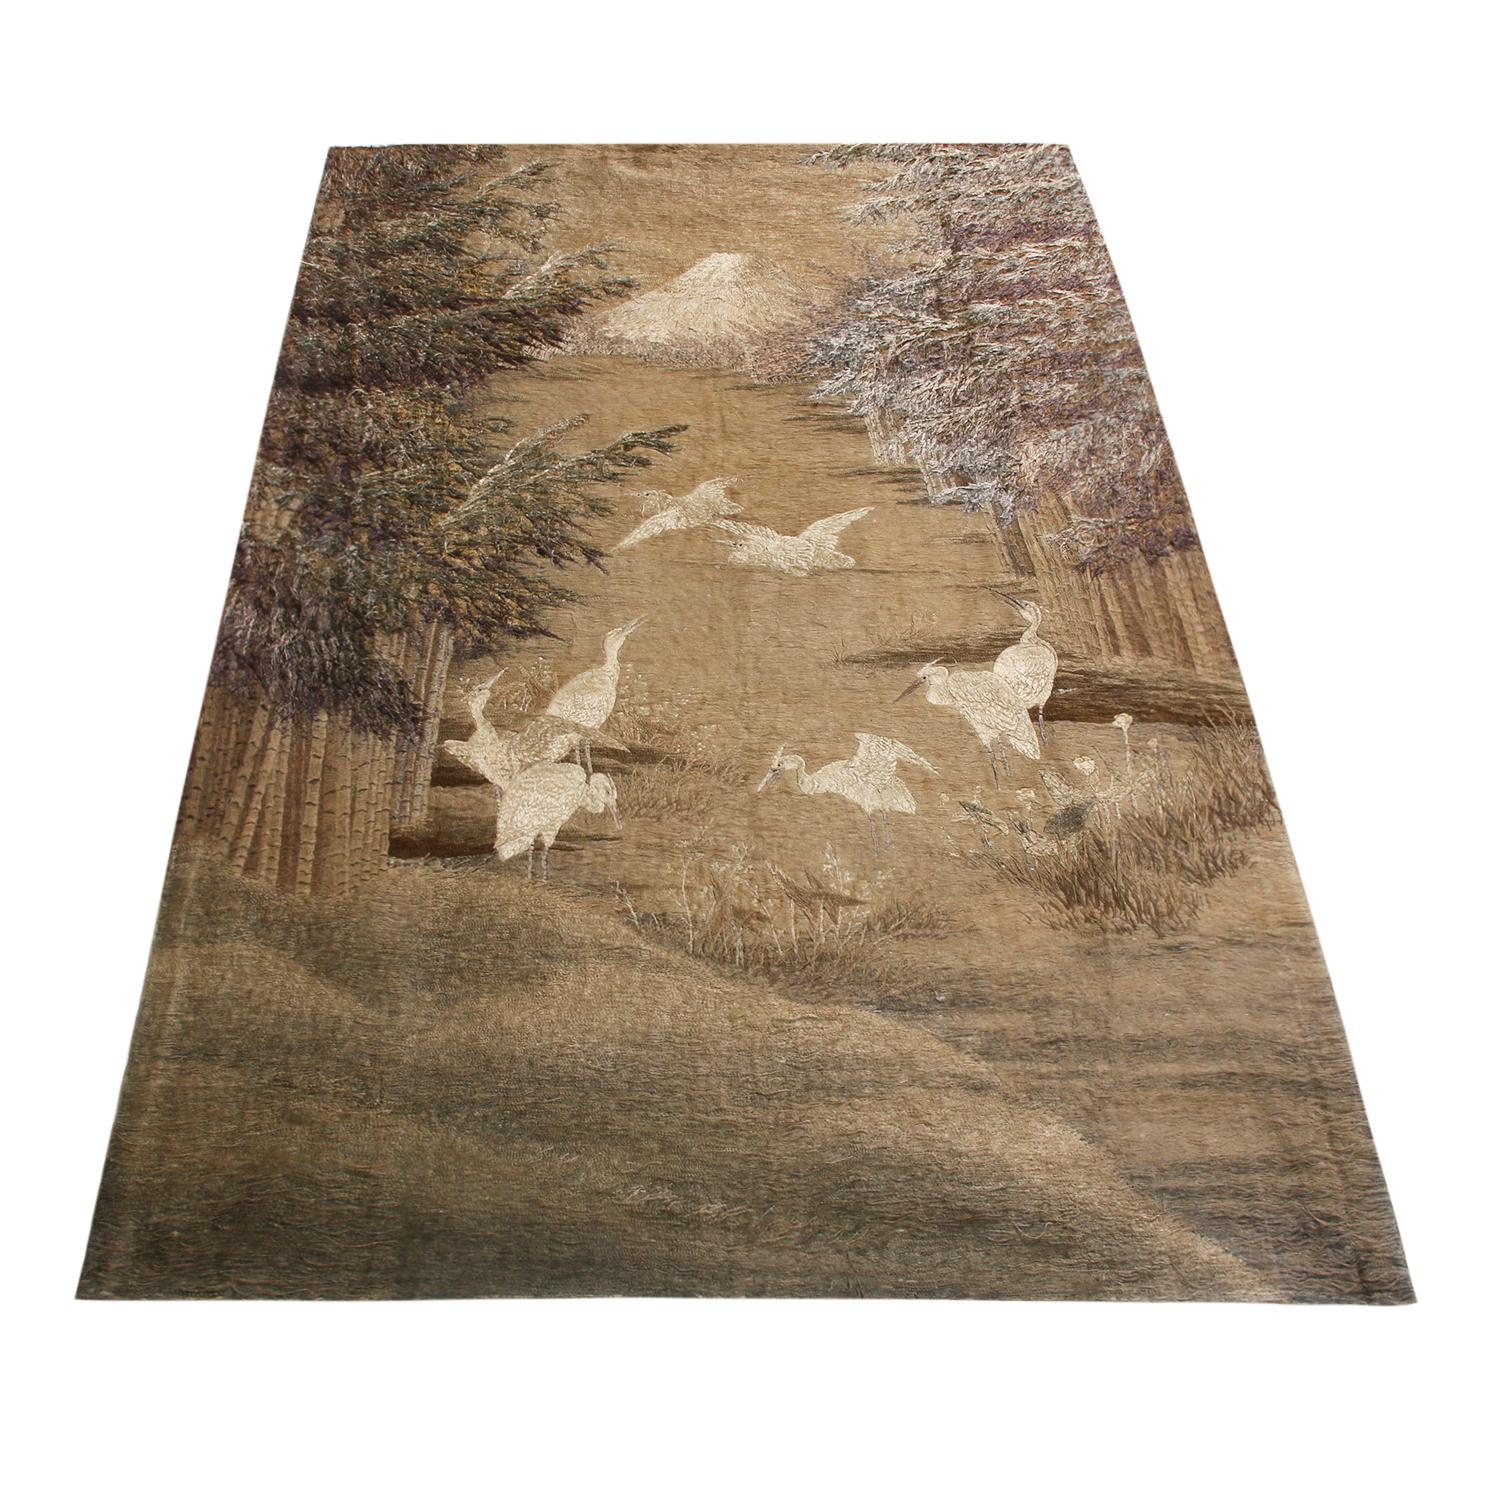 Hand knotted in high-quality, naturally lustrous silk, this antique Japanese tapestry from 1880 employs a serene setting with bold colorway choices, including the multicolor accents on the incredibly stylized crane and bamboo depictions in hues of